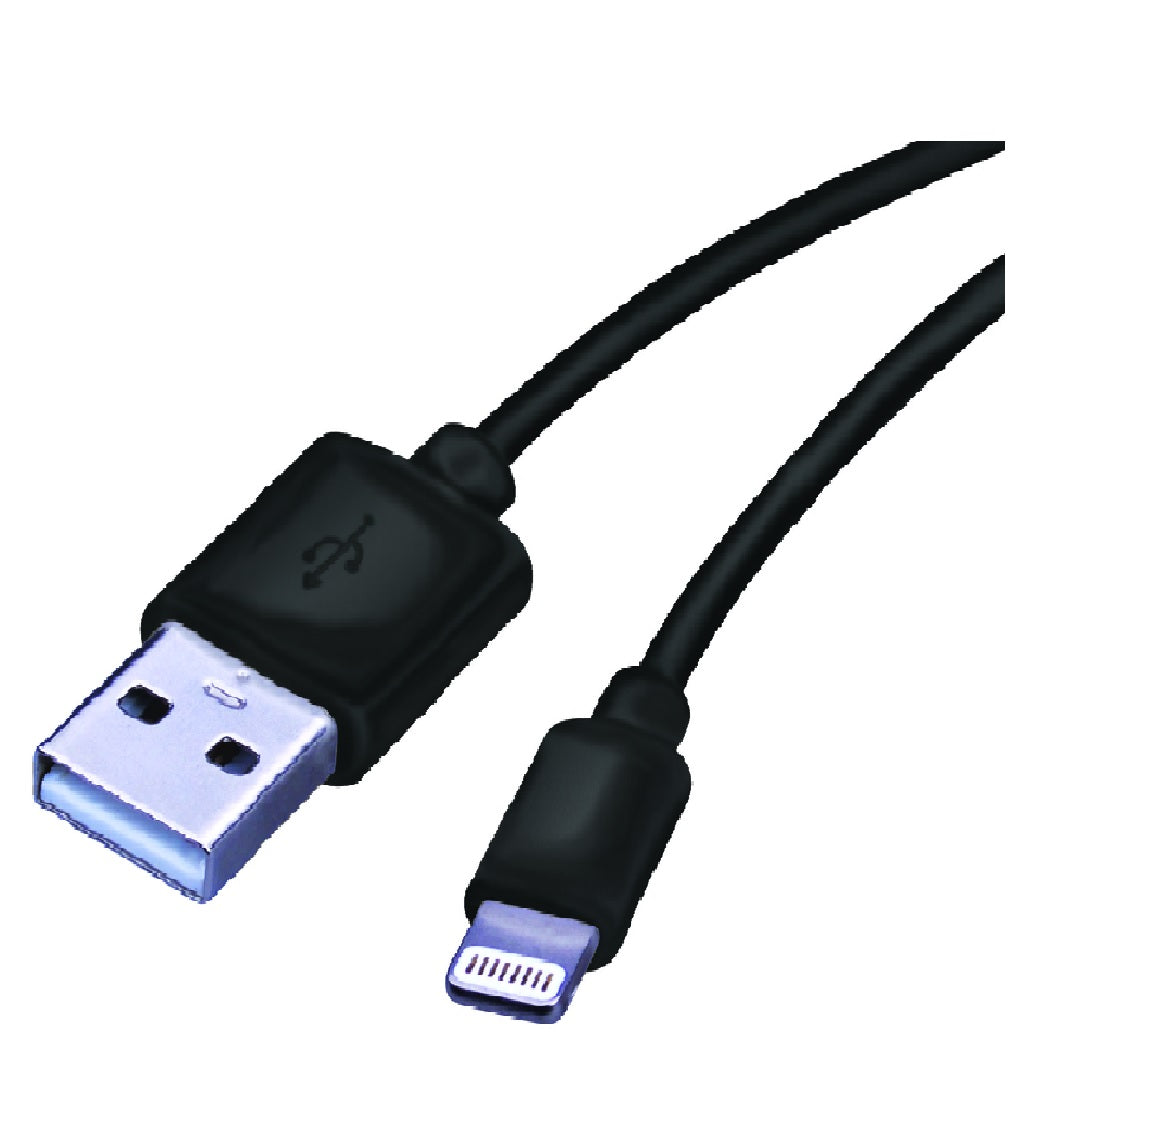 Fabcordz FAB-1001 Lightning to USB Charge and Sync Cable